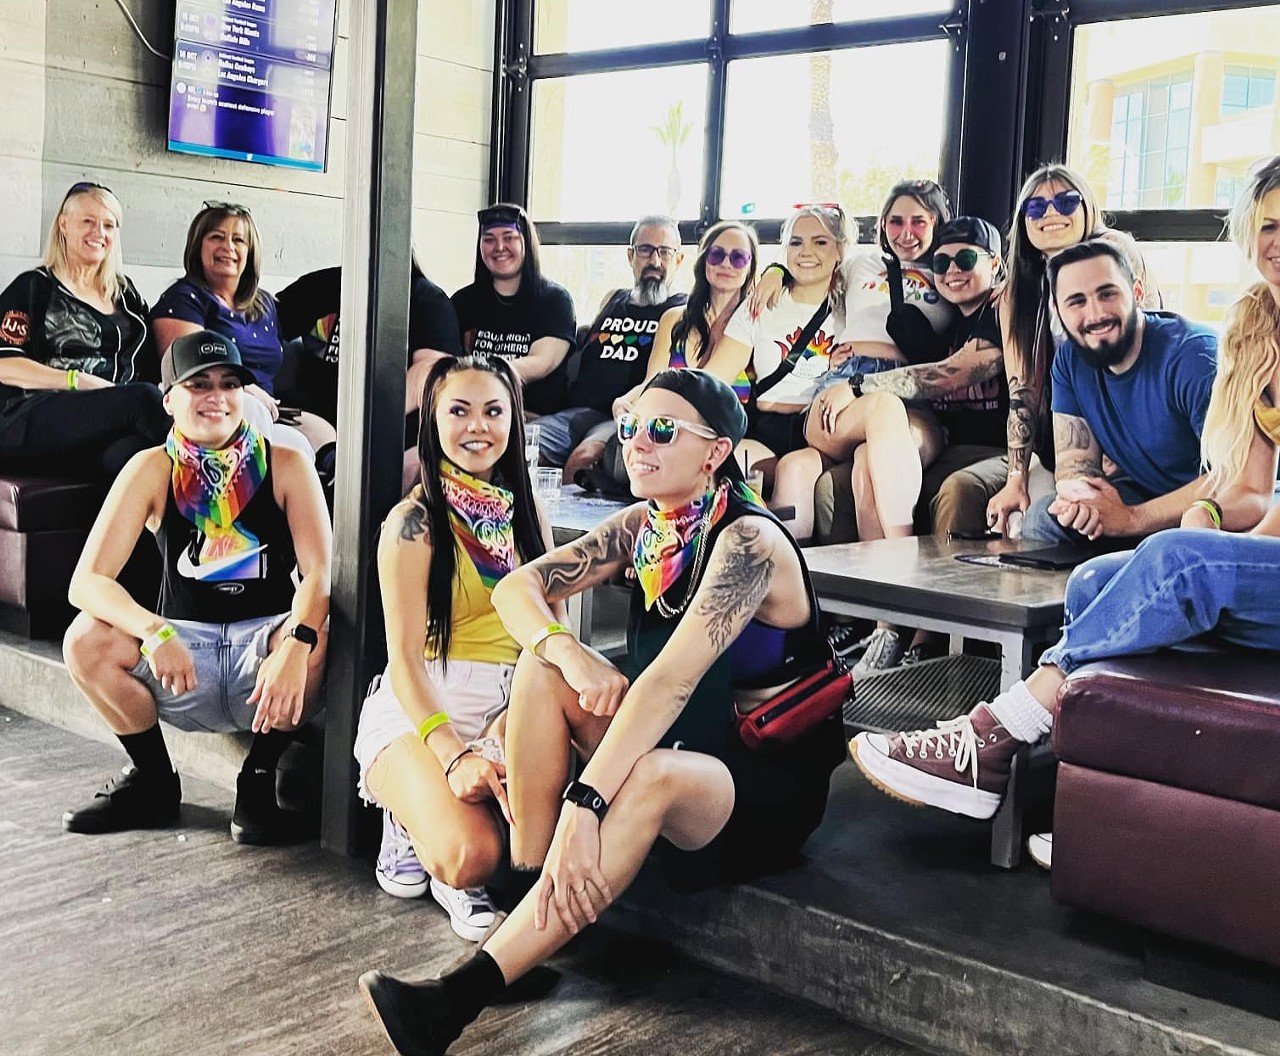 Corktown Pride Bar Crawl
June 29, 5-11 p.m.; Various locations in Corktown, Detroit; eventbrite.com
Celebrate love, diversity, and unity at four Corktown bars for the Official Pride Bar Crawl. Each stop will feature specialty pride-themed cocktails and lively entertainment for queer people and allies. 